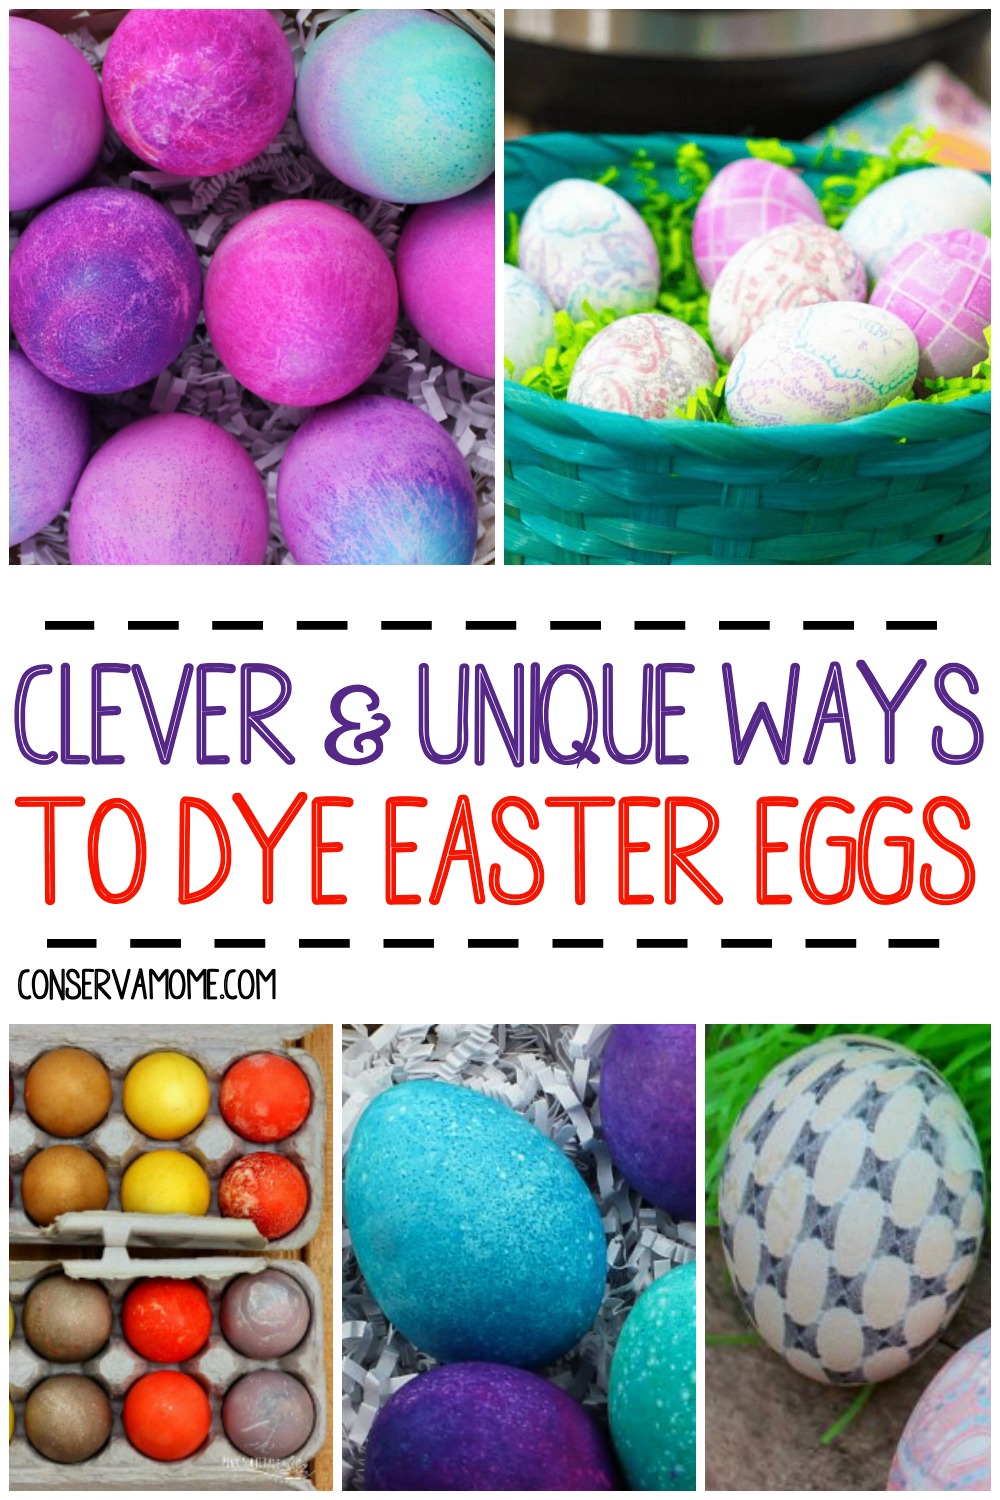 Unique Ways to Dye Easter Eggs